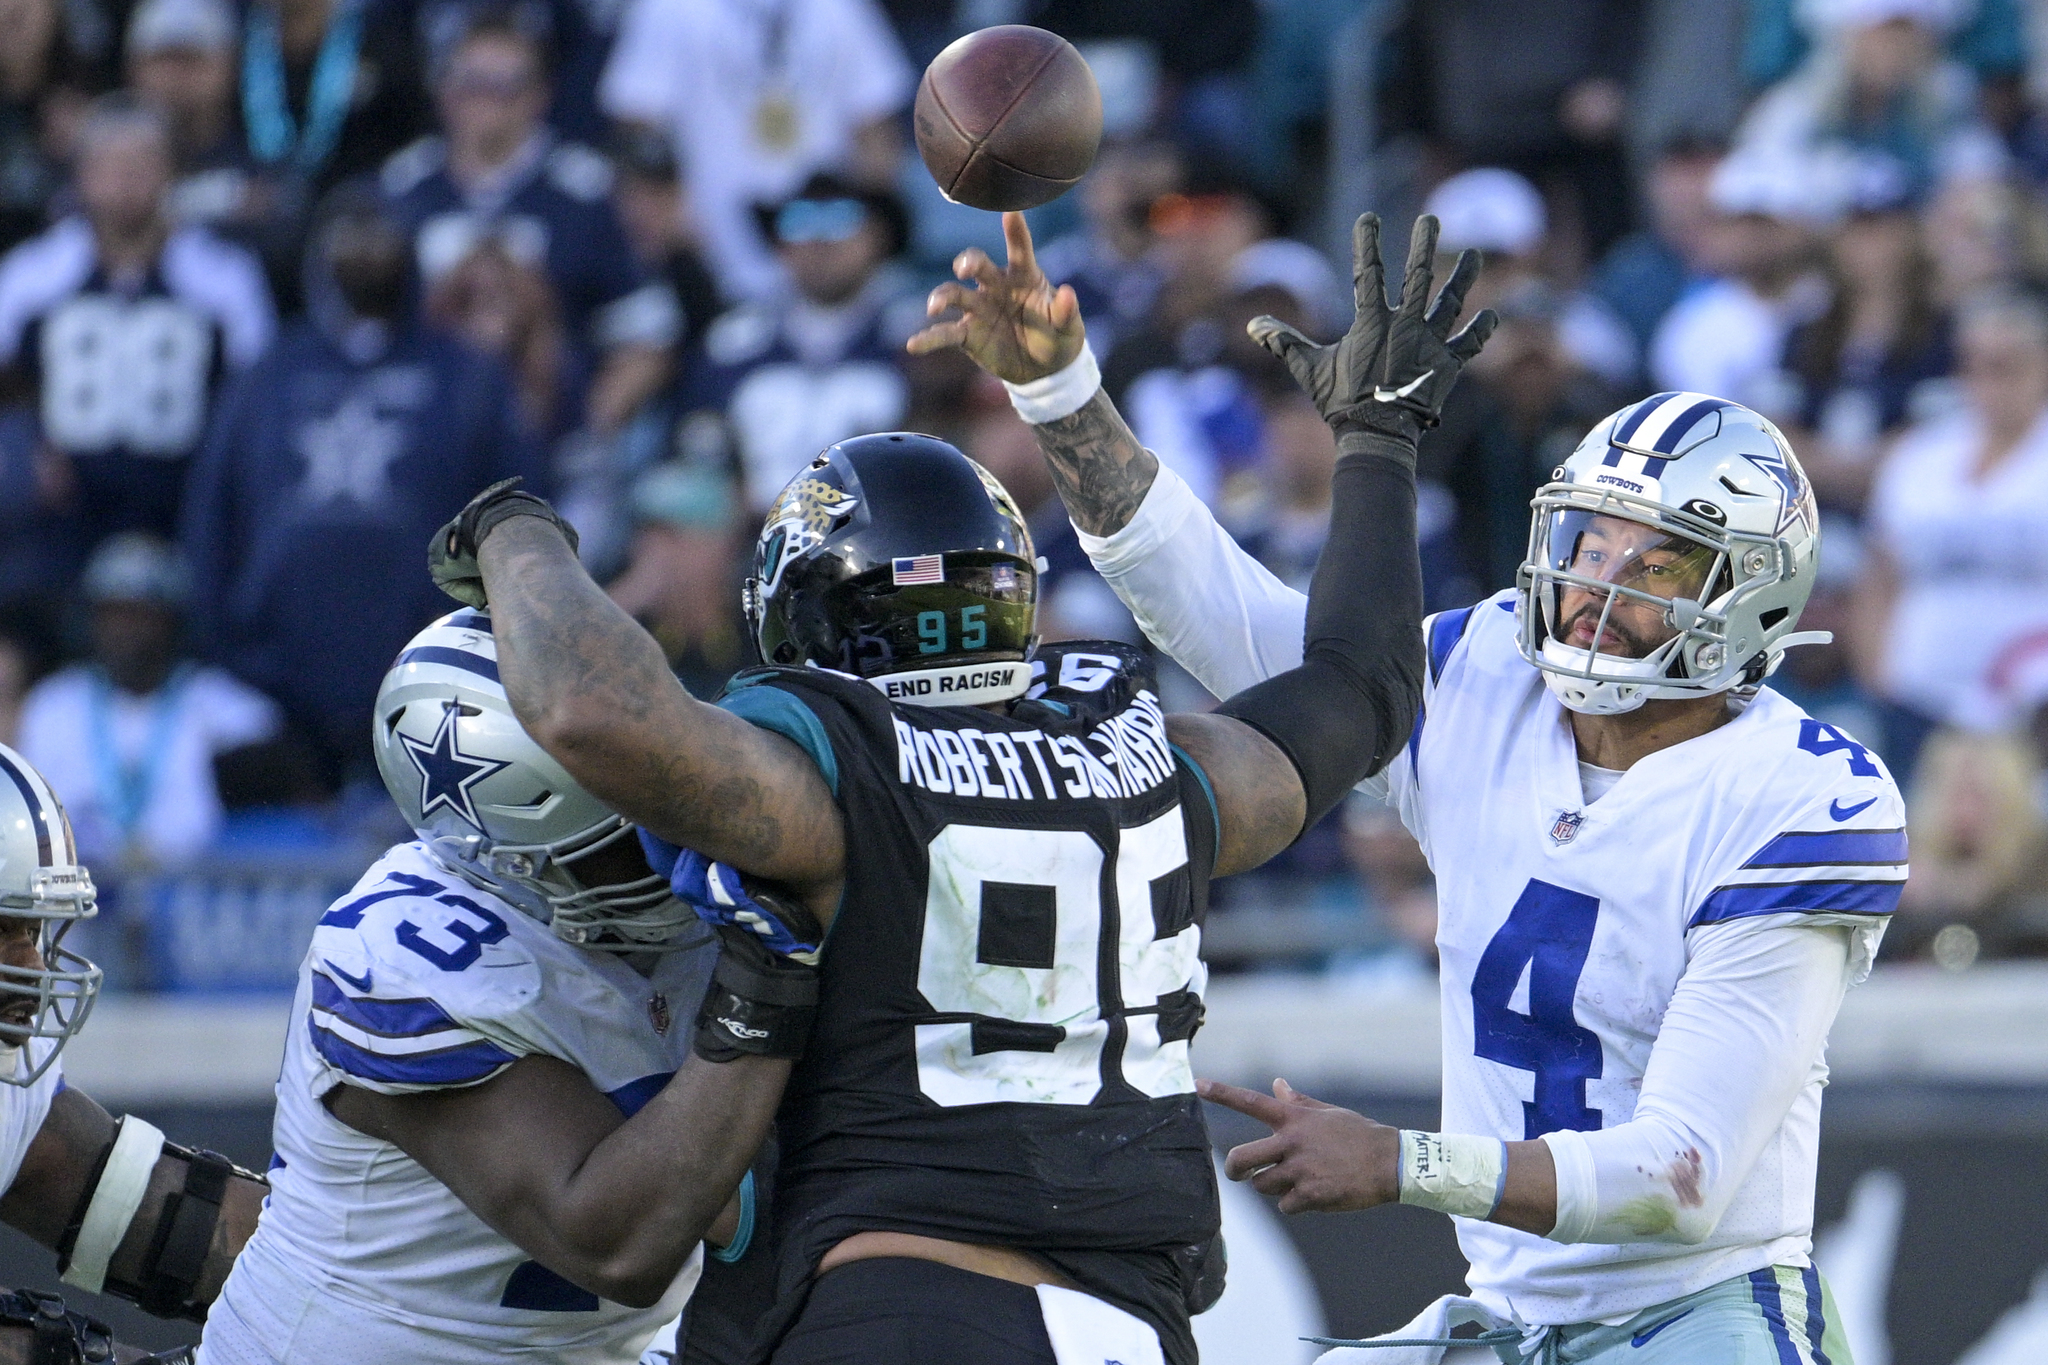 Dallas Cowboys quarterback throws an interception pass against Jacksonville Jaguars the last time they played in Jacksonville.